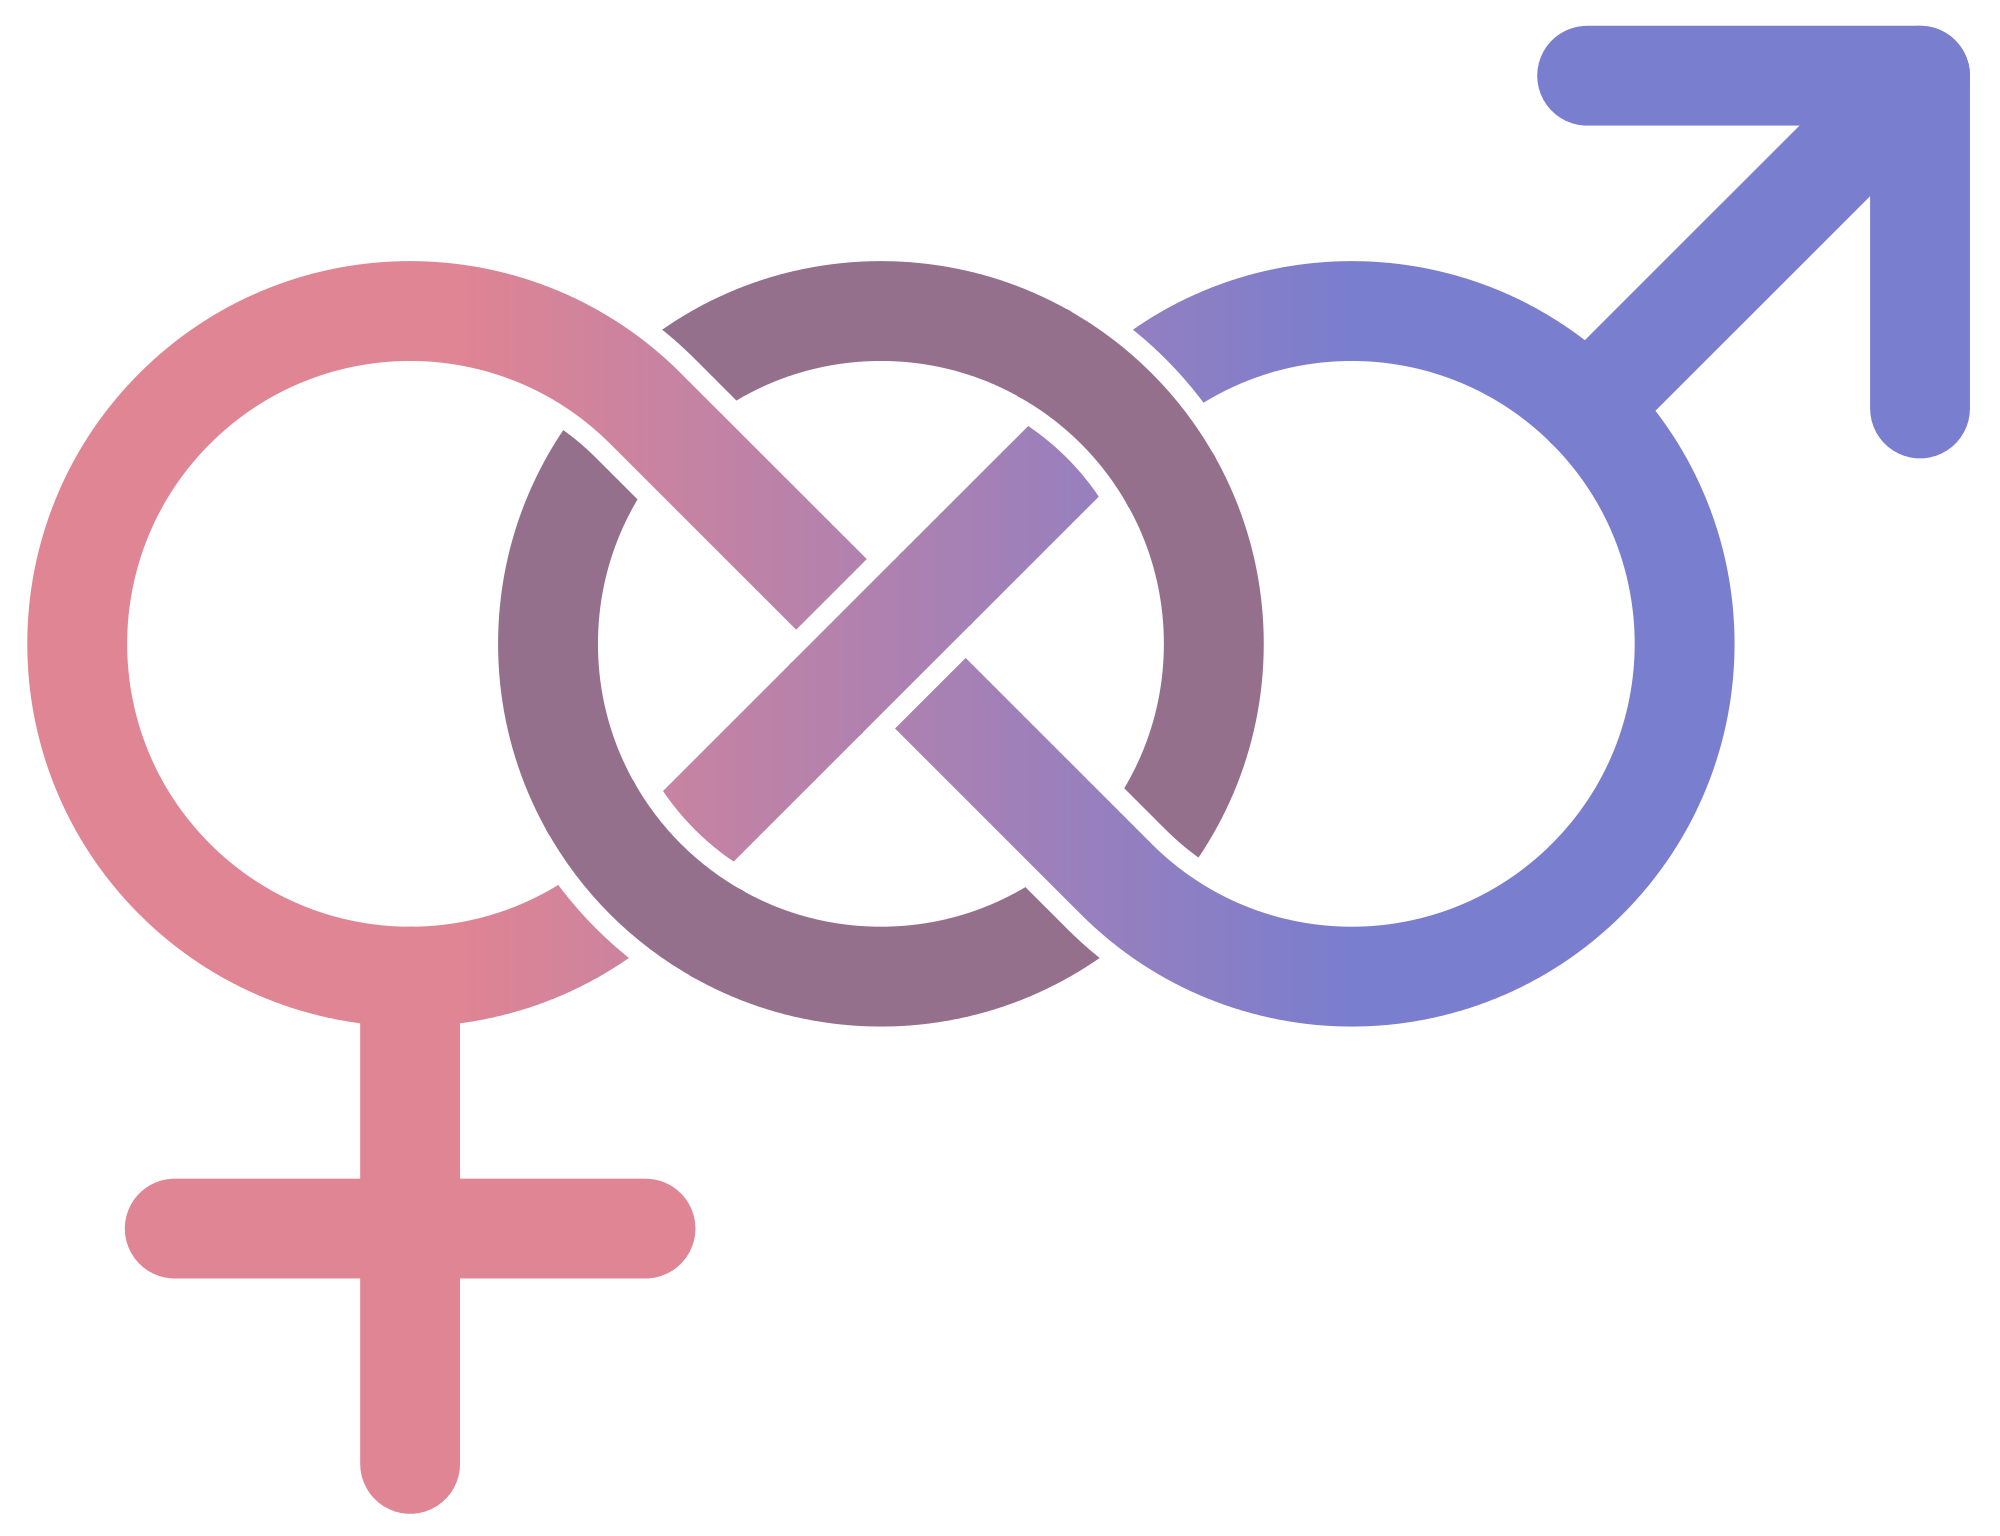 2000px-whitehead-link-alternative-sexuality-symbol_svg.png